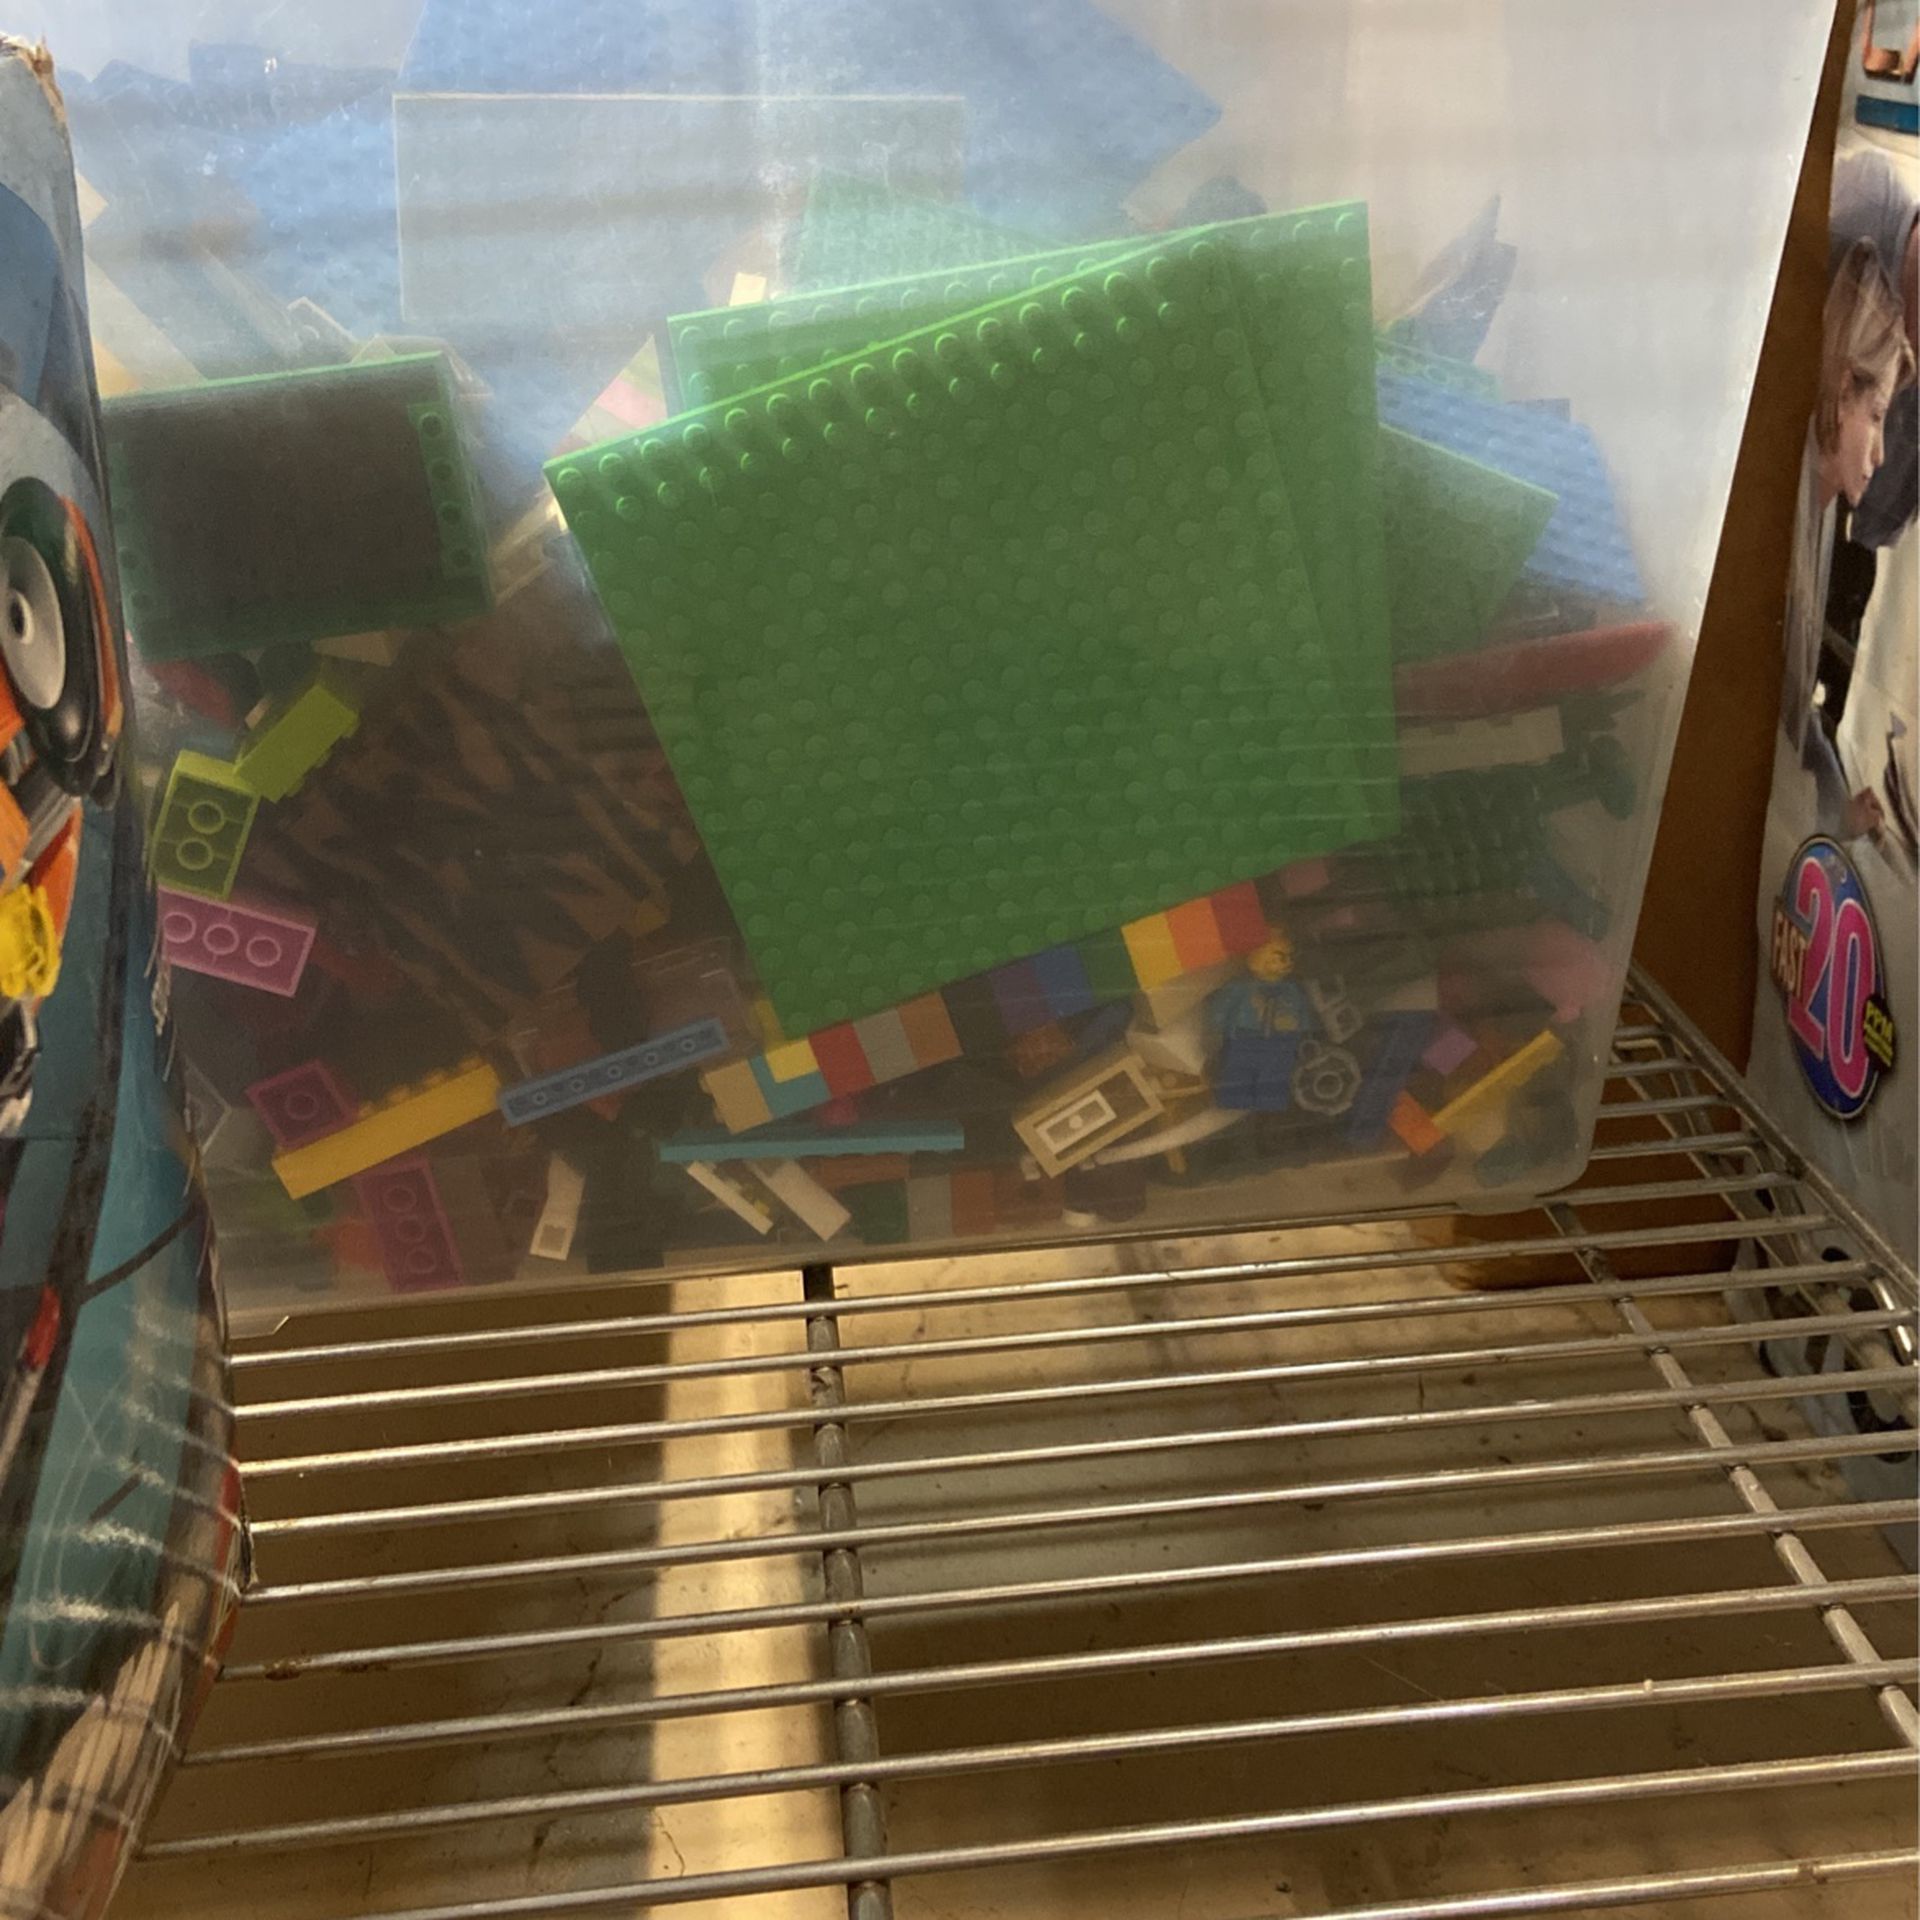 Lego Globe Set for Sale in Los Angeles, CA - OfferUp